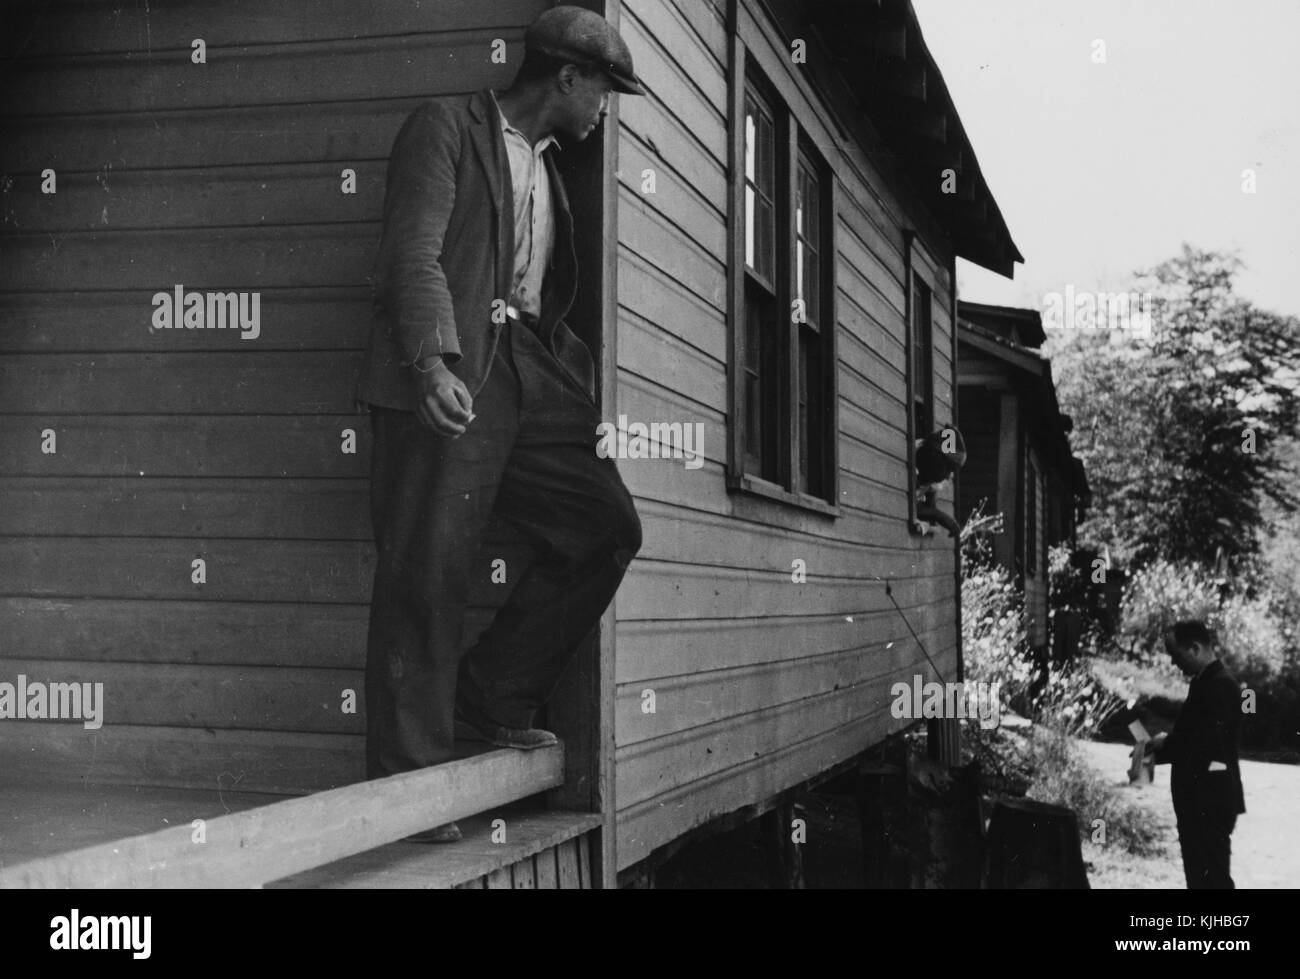 A photograph of an employee of the Farm Security Administration delivering a relief check to a farmer, the FSA relief checks were intended to improve the lives and farms of farmers around the country, a woman speaks to the man through an open window of her wooden home, a man stands on the porch smoking a cigarette while watching their interaction, Scott's Run, West Virginia, 1935. From the New York Public Library. Stock Photo